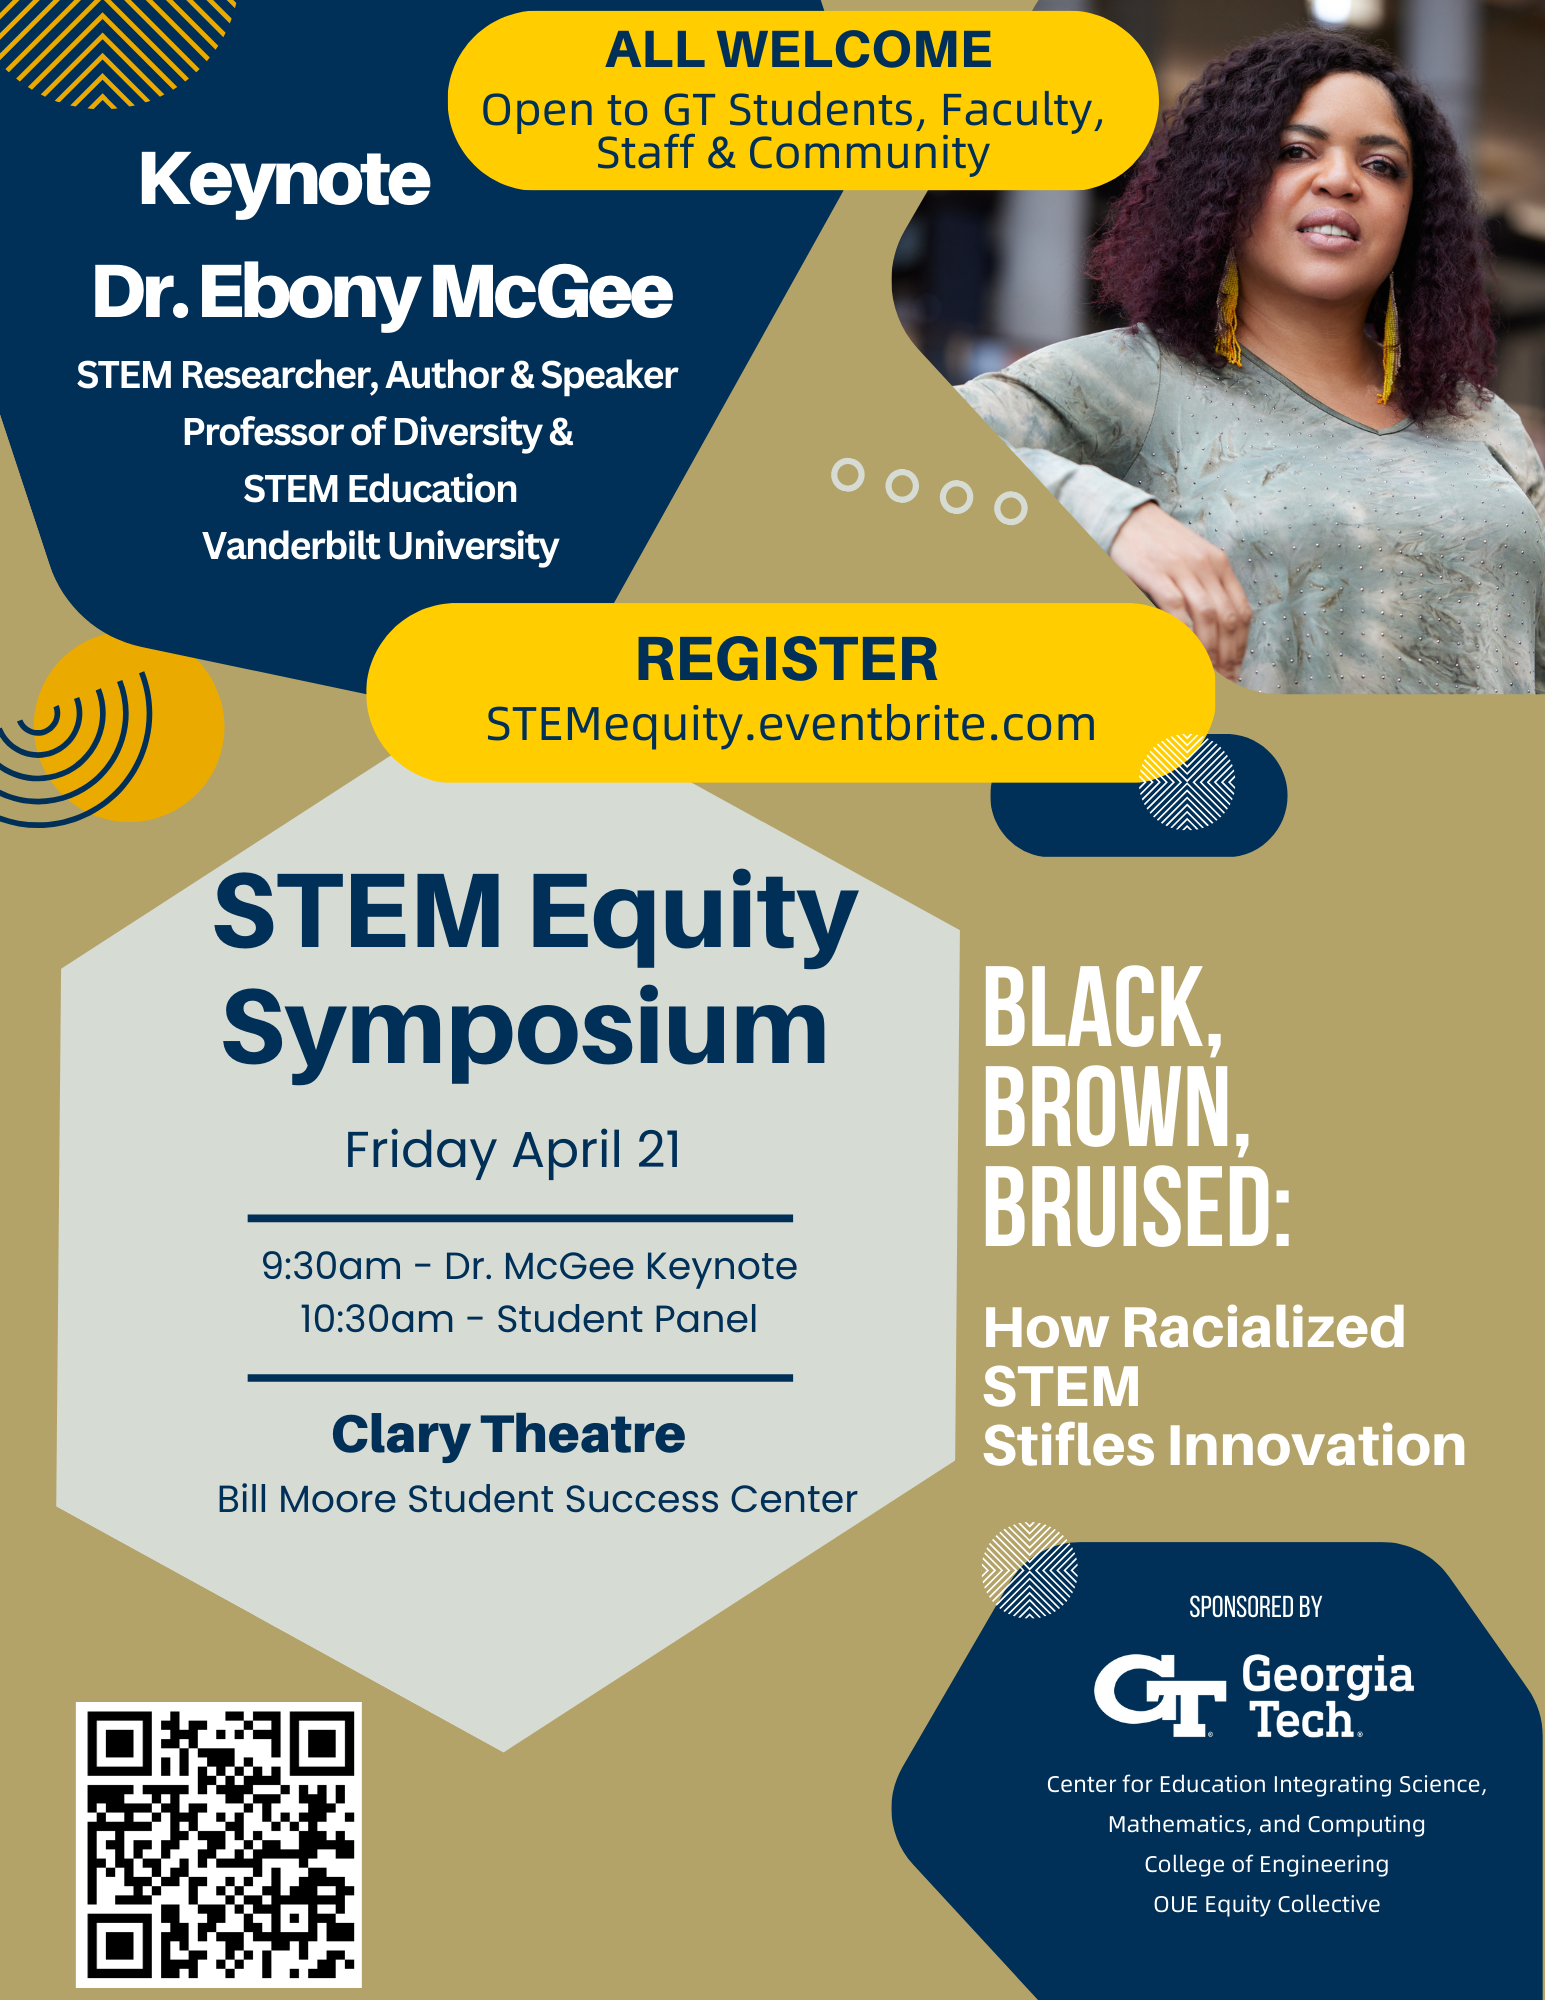 T﻿he STEM Equity Symposium is a collaboration between Georgia Tech's Center for Education Integrating Science, Mathematics, and Computing (CEISMC), the College of Engineering, and the OUE Equity Collective. Our goal is to provide programming that will foster a campus culture and climate that is welcoming for all students, faculty, and staff -- especially in STEM disciplines.
